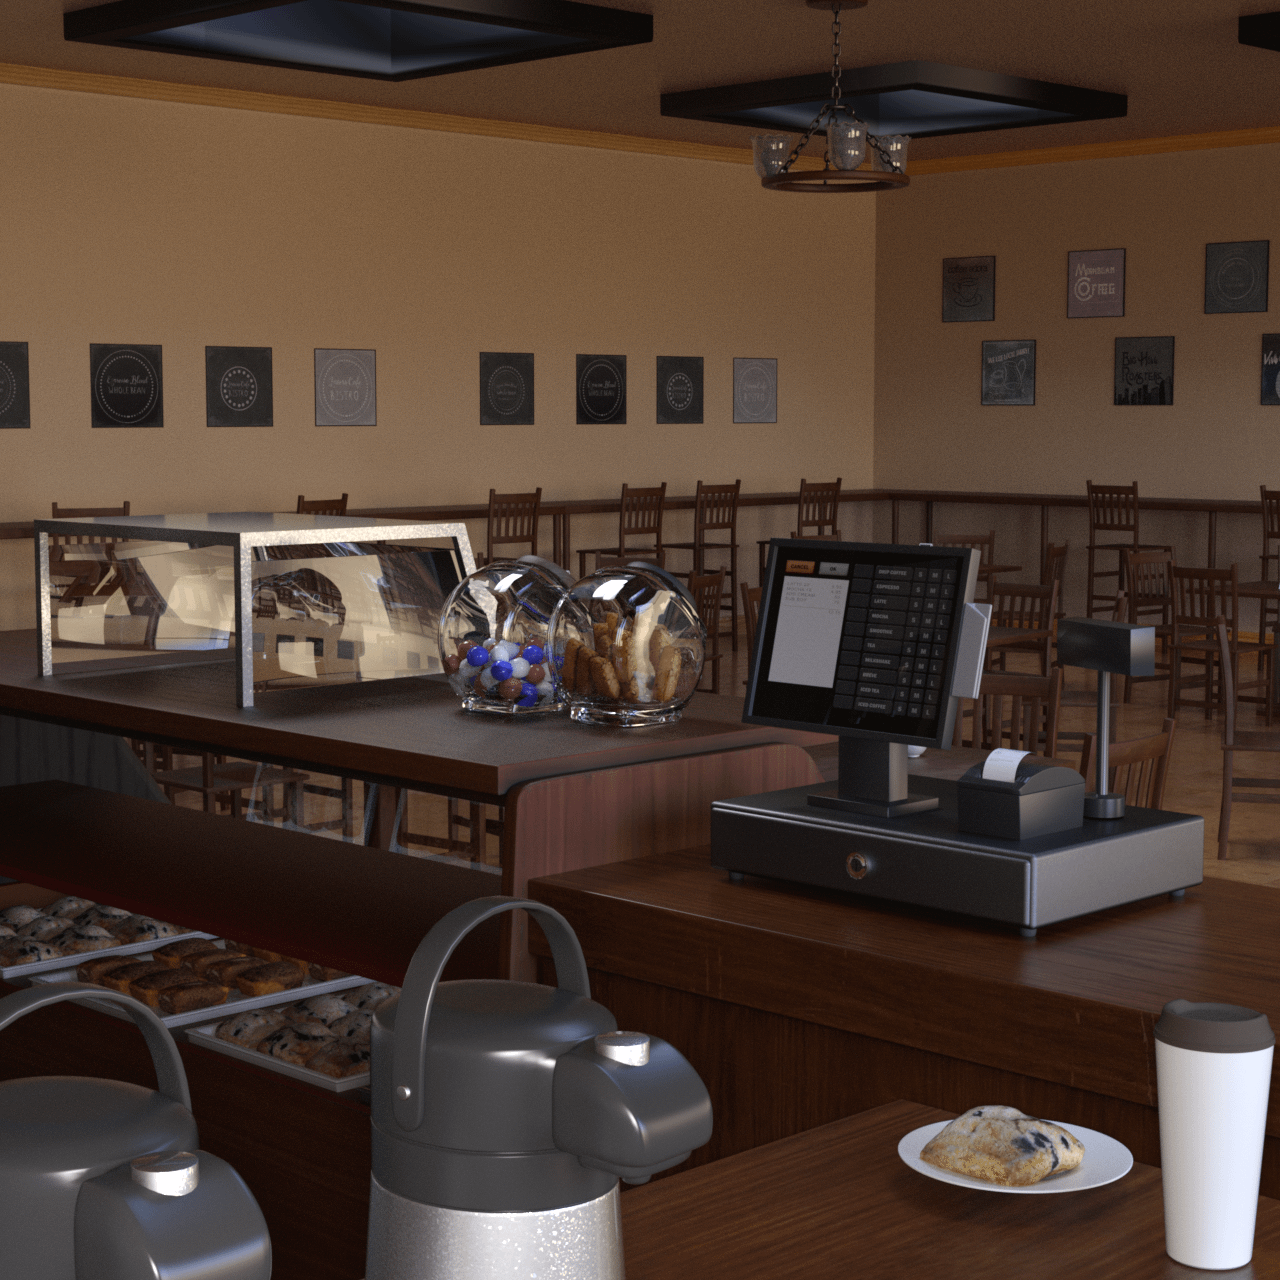 Behind the counter of the coffee bar 3d model